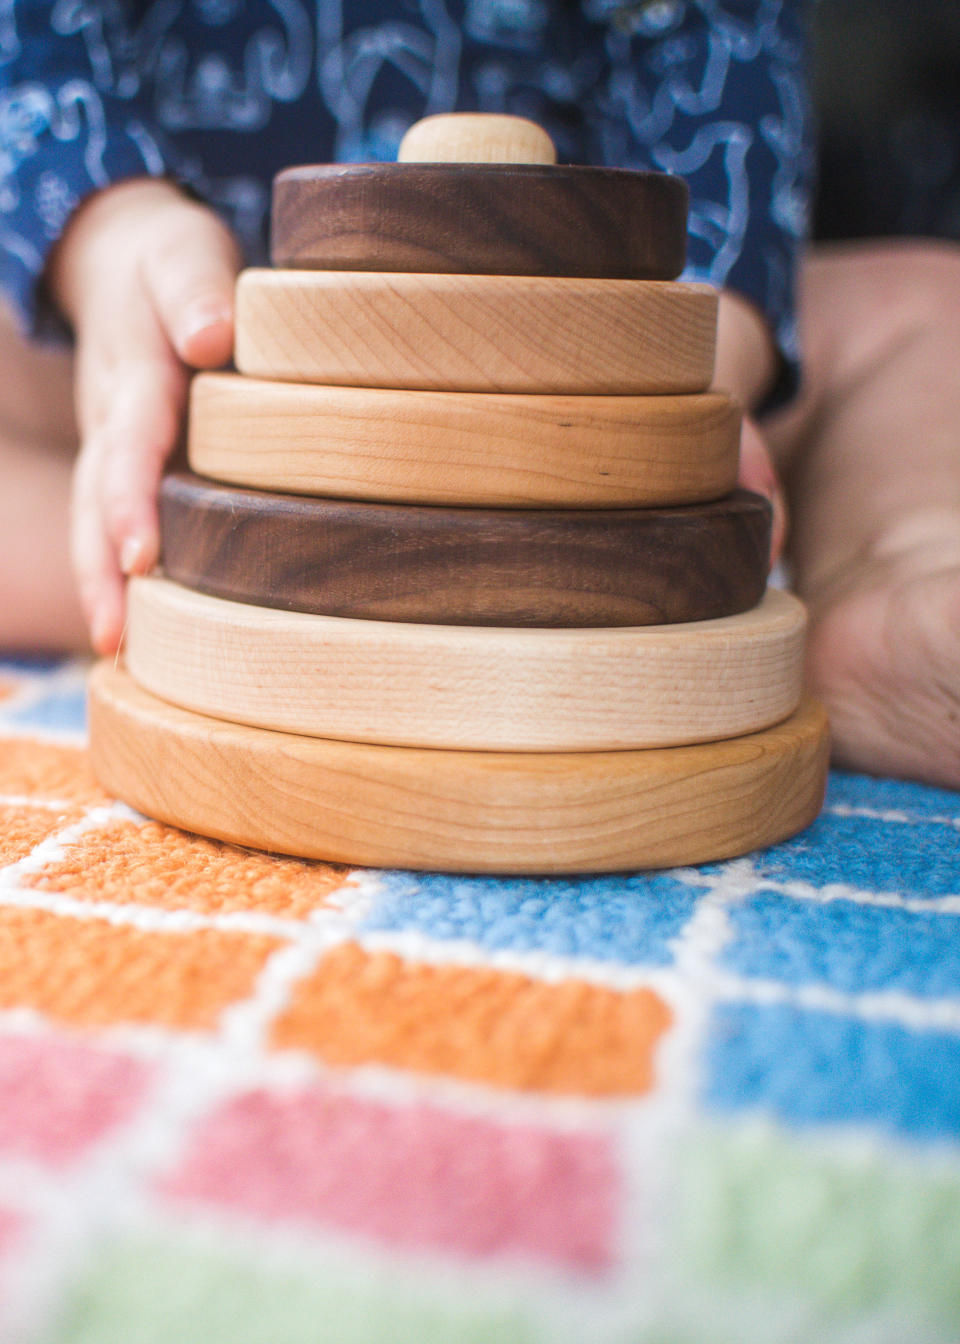 This image released by Etsy shows wooden circle stackers for infants and toddlers by Etsy seller, SouthBendWorks. (Etsy via AP)